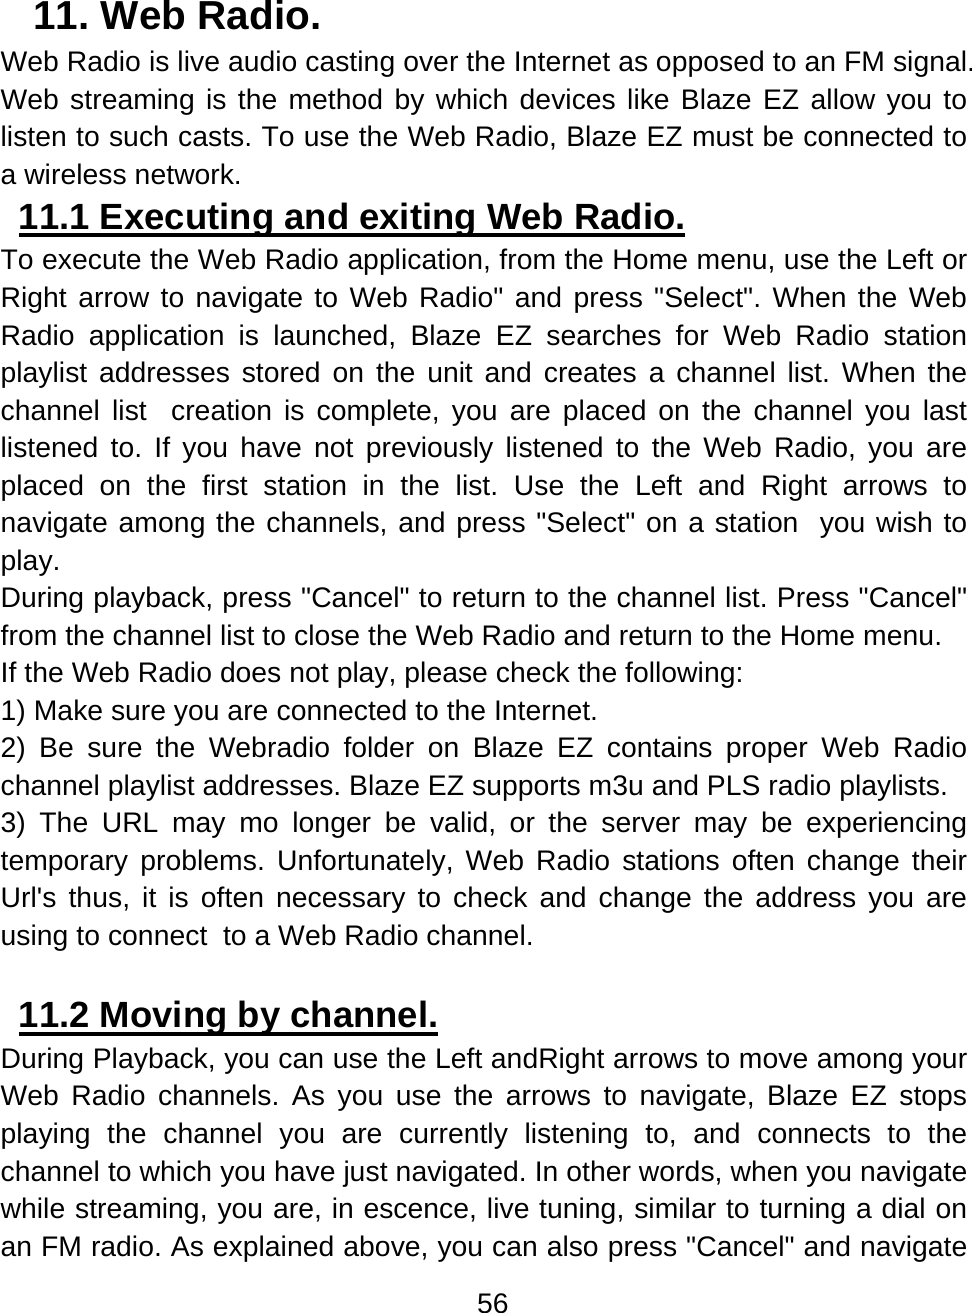 56  11. Web Radio.  Web Radio is live audio casting over the Internet as opposed to an FM signal. Web streaming is the method by which devices like Blaze EZ allow you to listen to such casts. To use the Web Radio, Blaze EZ must be connected to a wireless network.  11.1 Executing and exiting Web Radio.  To execute the Web Radio application, from the Home menu, use the Left or Right arrow to navigate to Web Radio&quot; and press &quot;Select&quot;. When the Web Radio application is launched, Blaze EZ searches for Web Radio station playlist addresses stored on the unit and creates a channel list. When the channel list  creation is complete, you are placed on the channel you last listened to. If you have not previously listened to the Web Radio, you are placed on the first station in the list. Use the Left and Right arrows to navigate among the channels, and press &quot;Select&quot; on a station  you wish to play. During playback, press &quot;Cancel&quot; to return to the channel list. Press &quot;Cancel&quot; from the channel list to close the Web Radio and return to the Home menu. If the Web Radio does not play, please check the following: 1) Make sure you are connected to the Internet. 2) Be sure the Webradio folder on Blaze EZ contains proper Web Radio channel playlist addresses. Blaze EZ supports m3u and PLS radio playlists. 3) The URL may mo longer be valid, or the server may be experiencing temporary problems. Unfortunately, Web Radio stations often change their Url&apos;s thus, it is often necessary to check and change the address you are using to connect  to a Web Radio channel.   11.2 Moving by channel.  During Playback, you can use the Left andRight arrows to move among your Web Radio channels. As you use the arrows to navigate, Blaze EZ stops playing the channel you are currently listening to, and connects to the channel to which you have just navigated. In other words, when you navigate while streaming, you are, in escence, live tuning, similar to turning a dial on an FM radio. As explained above, you can also press &quot;Cancel&quot; and navigate 